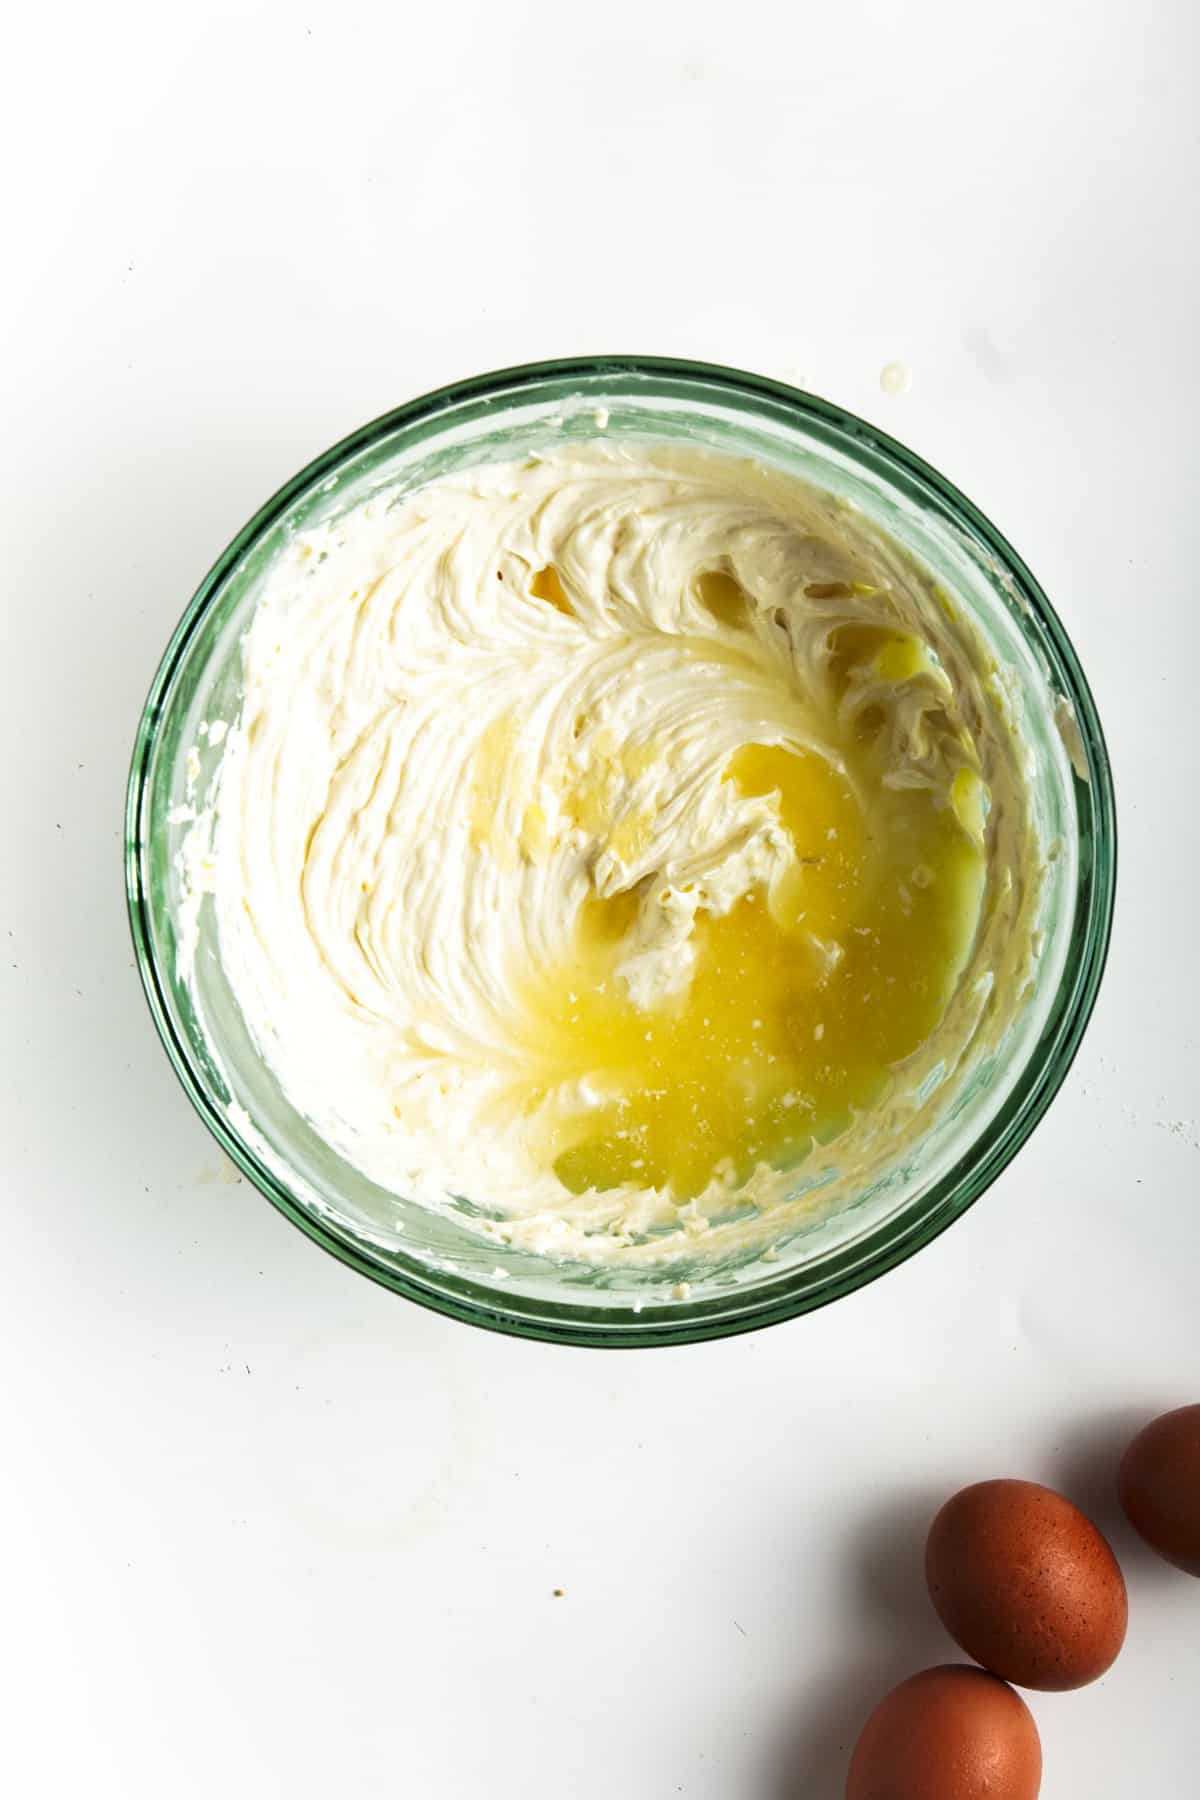 Cream cheese mixture with lemon juice in glass bowl.